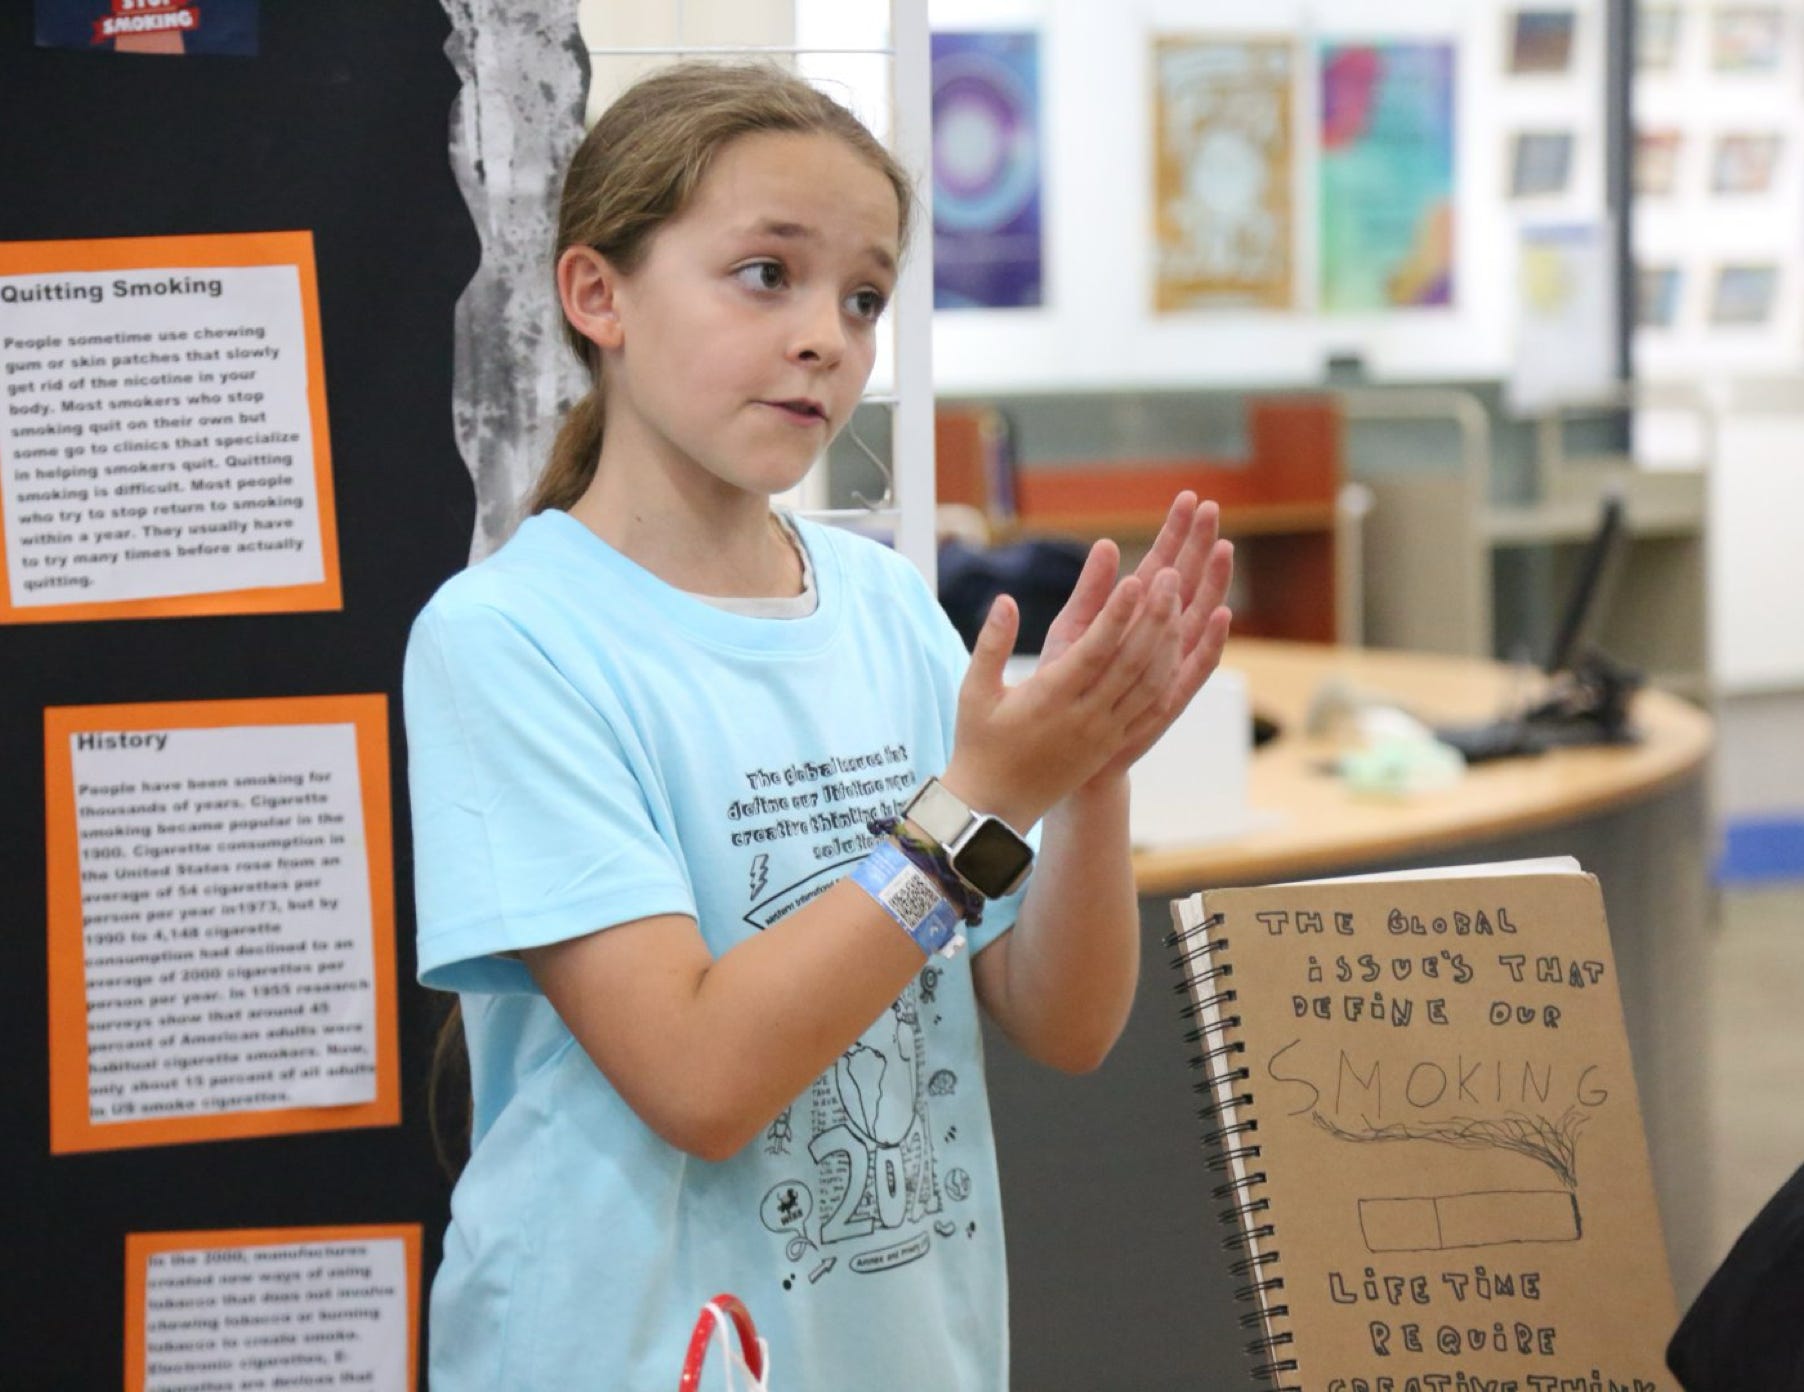 WISS Students are challenged to think globally